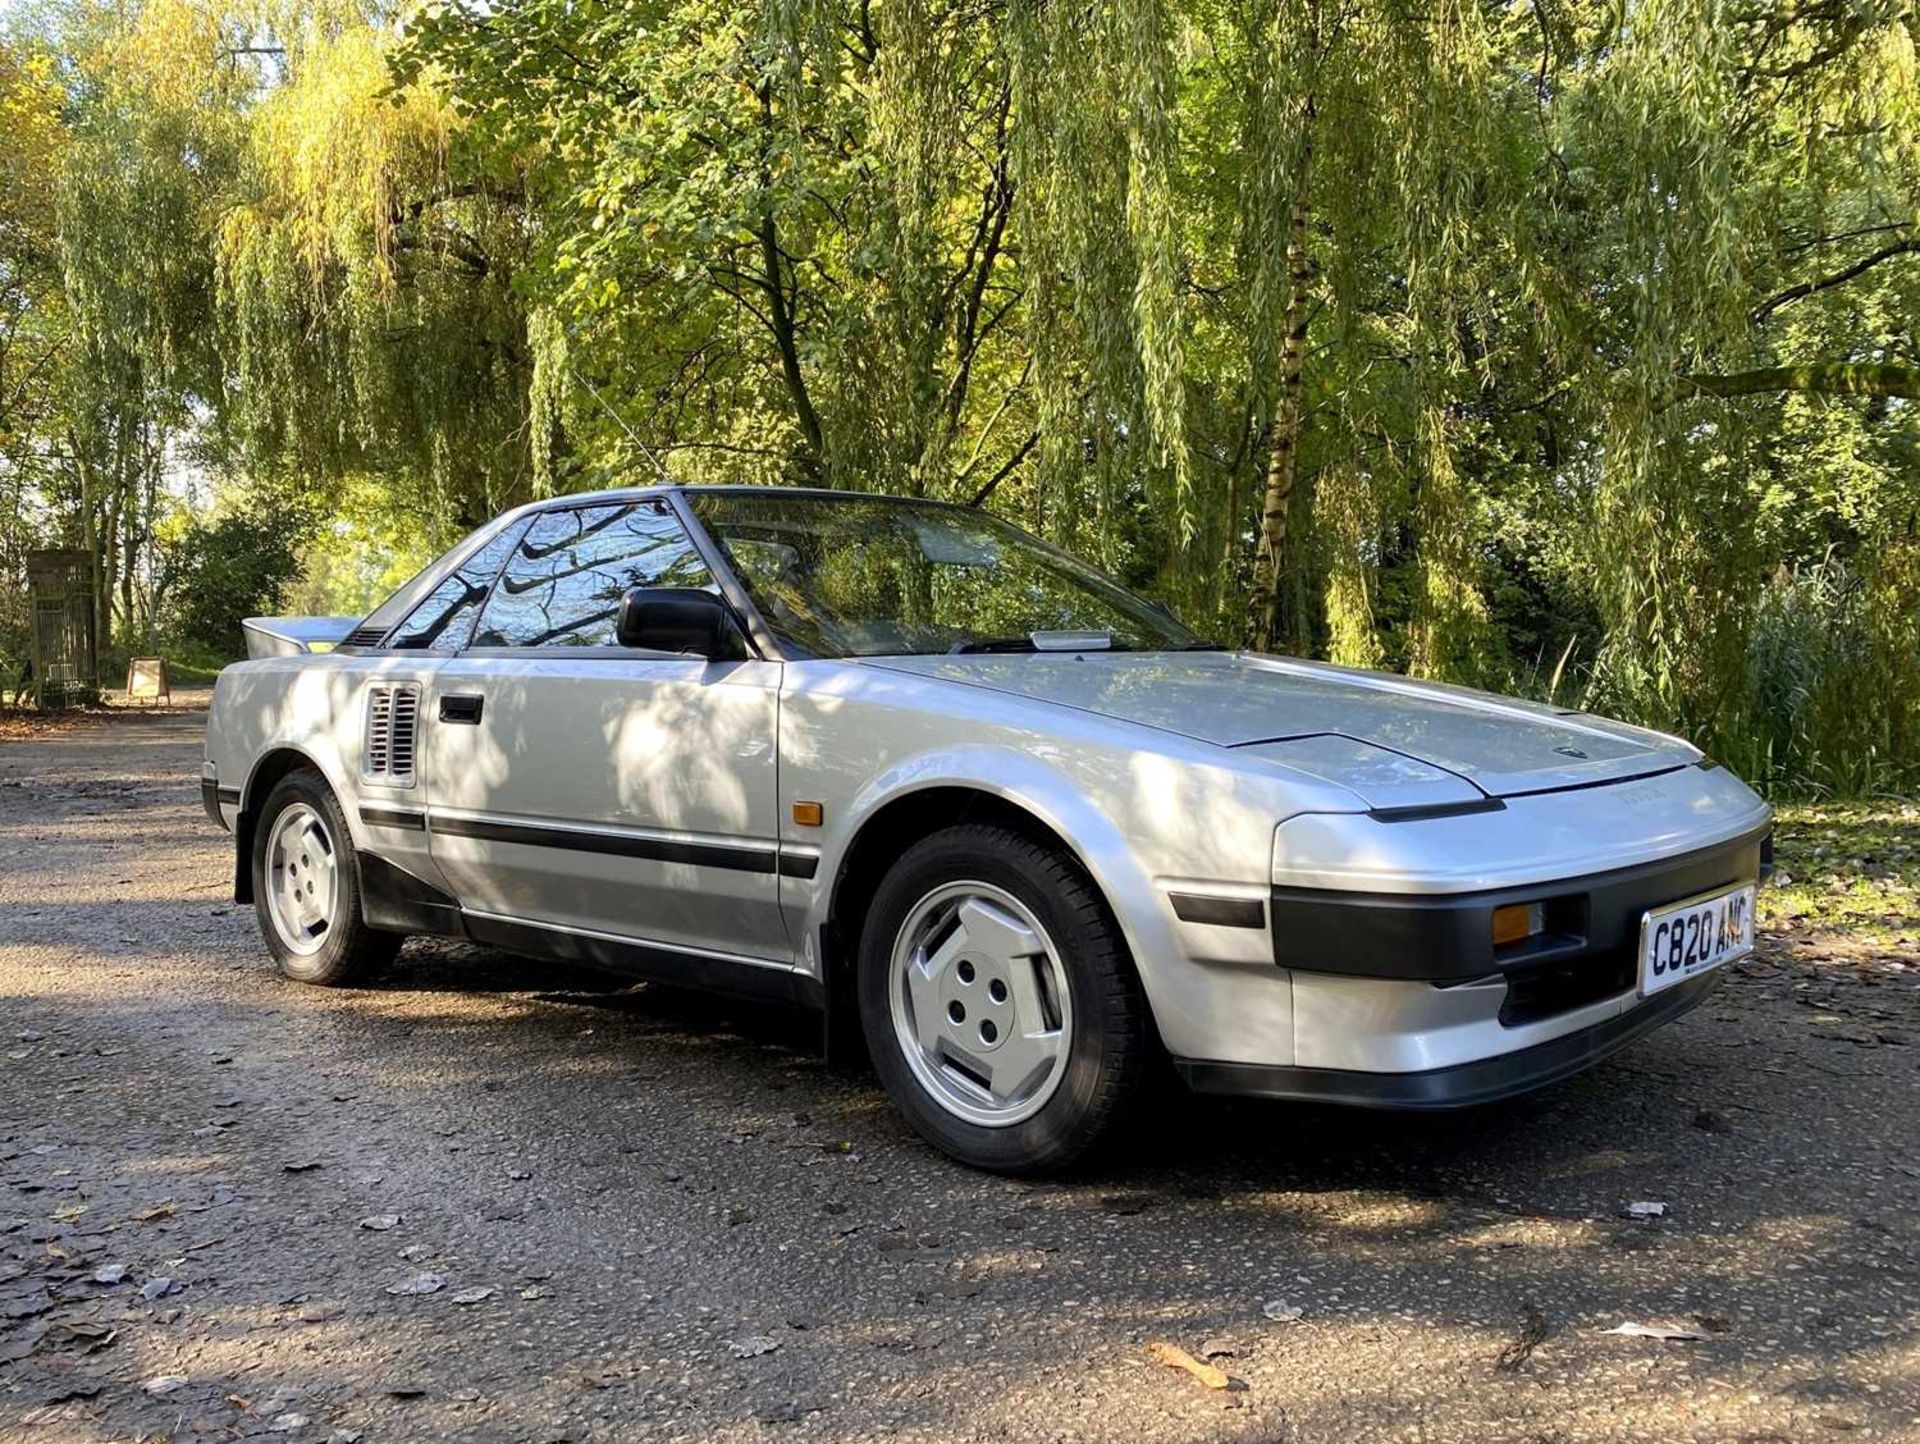 1985 Toyota MR2 Coupe Restored example of an appreciating modern classic - Image 5 of 100